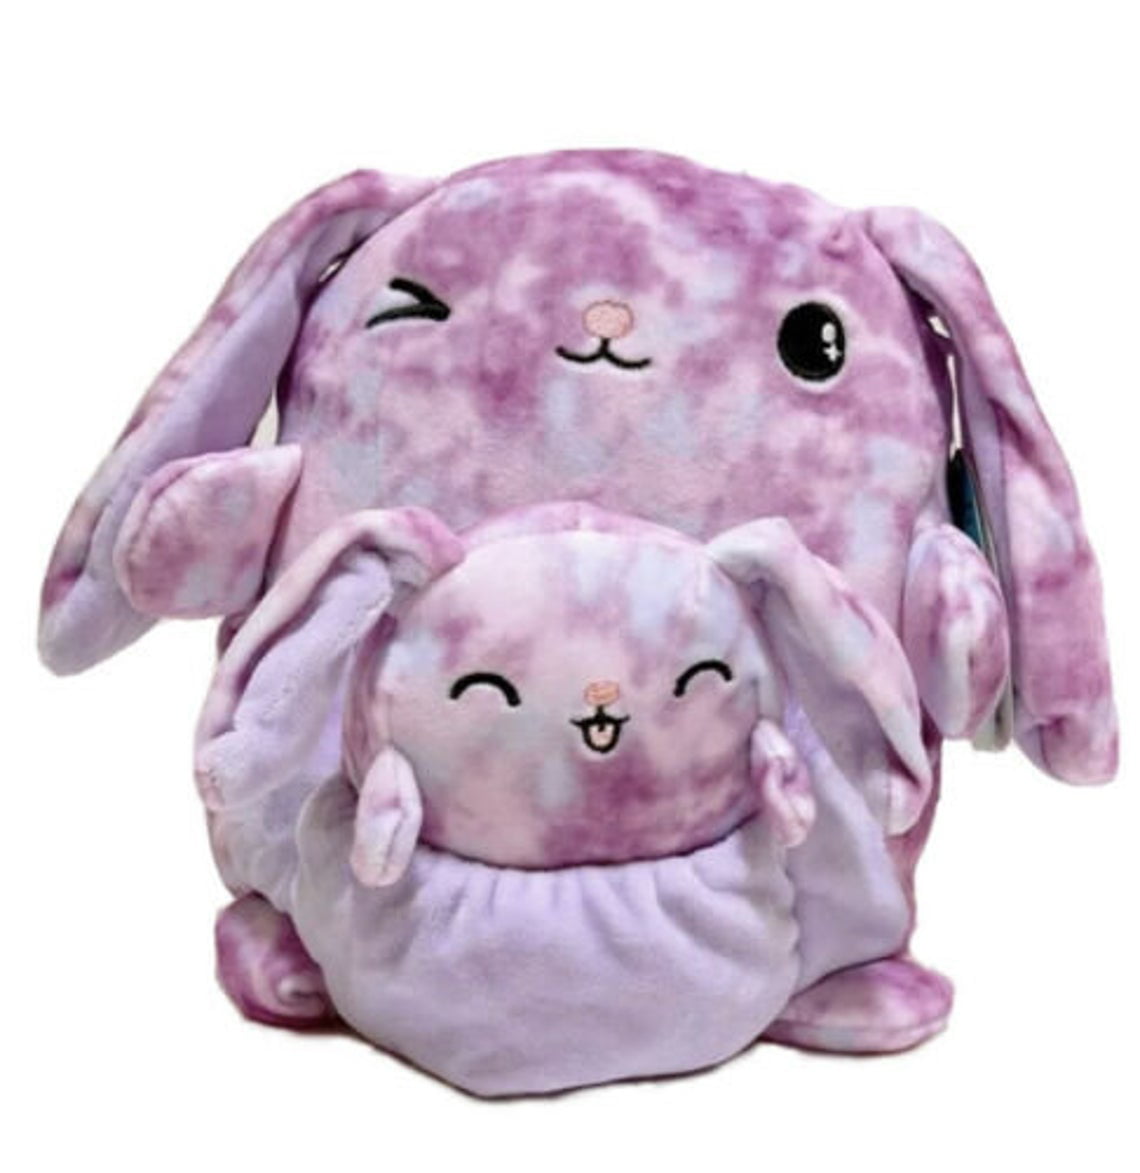 Squishmallow Kellytoy 8" Lilac The Bunny & Baby Plush Doll Toy Pillow Pet